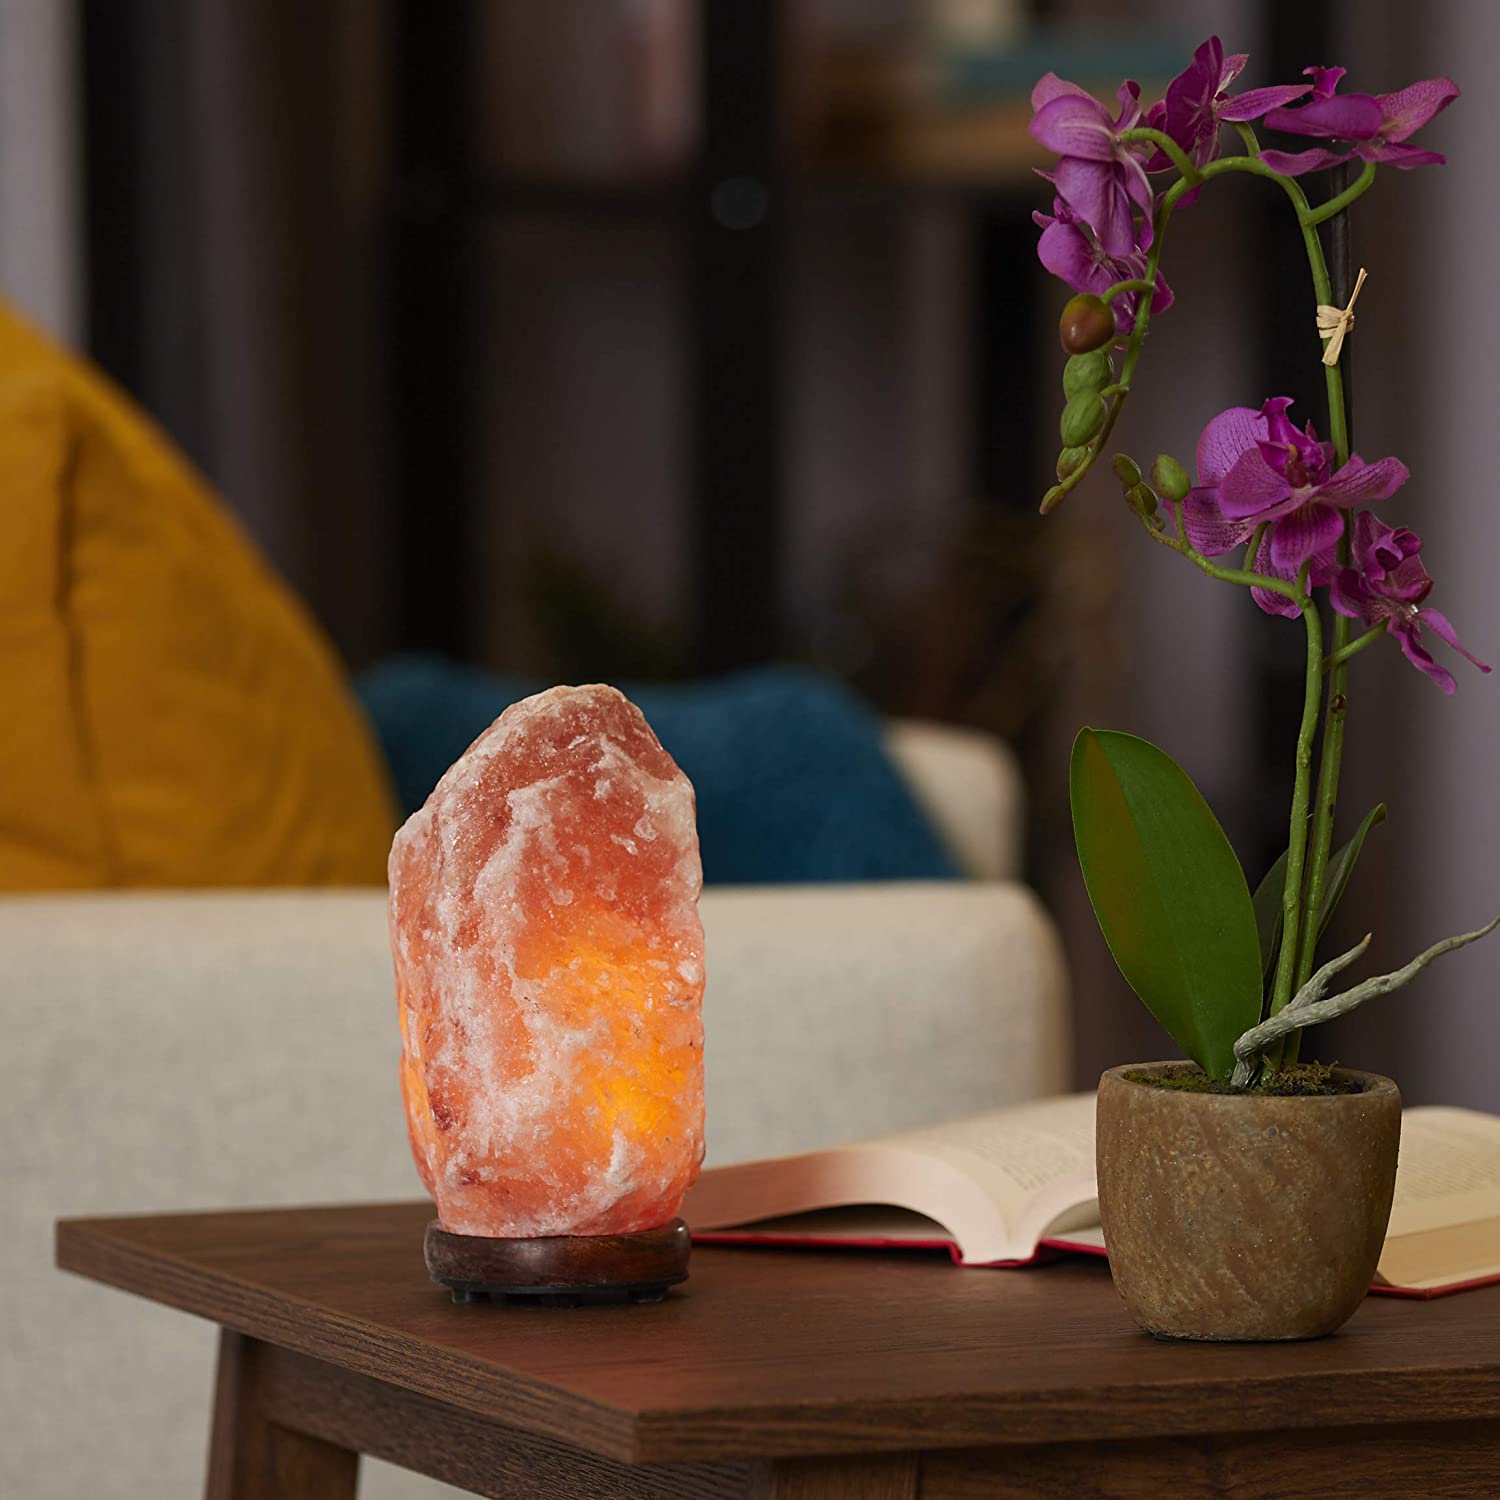 What Should I Do When My Himalayan Salt Lamp Leaks Water?